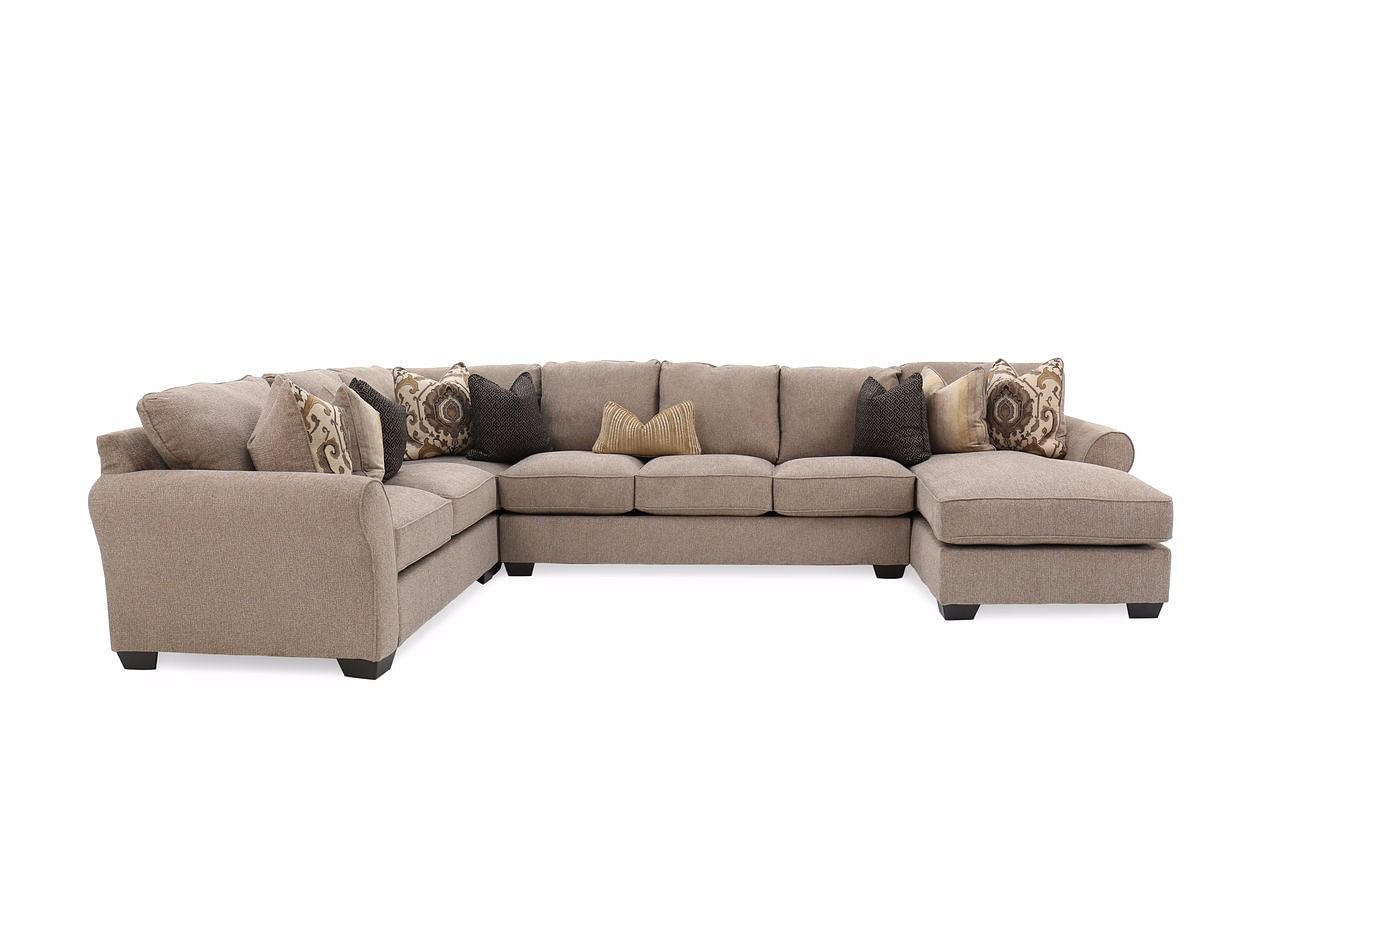 Ashley Furniture - Benchcraft Pantomine 4-Piece Sectional with Left Chaise at iStyle Furniture